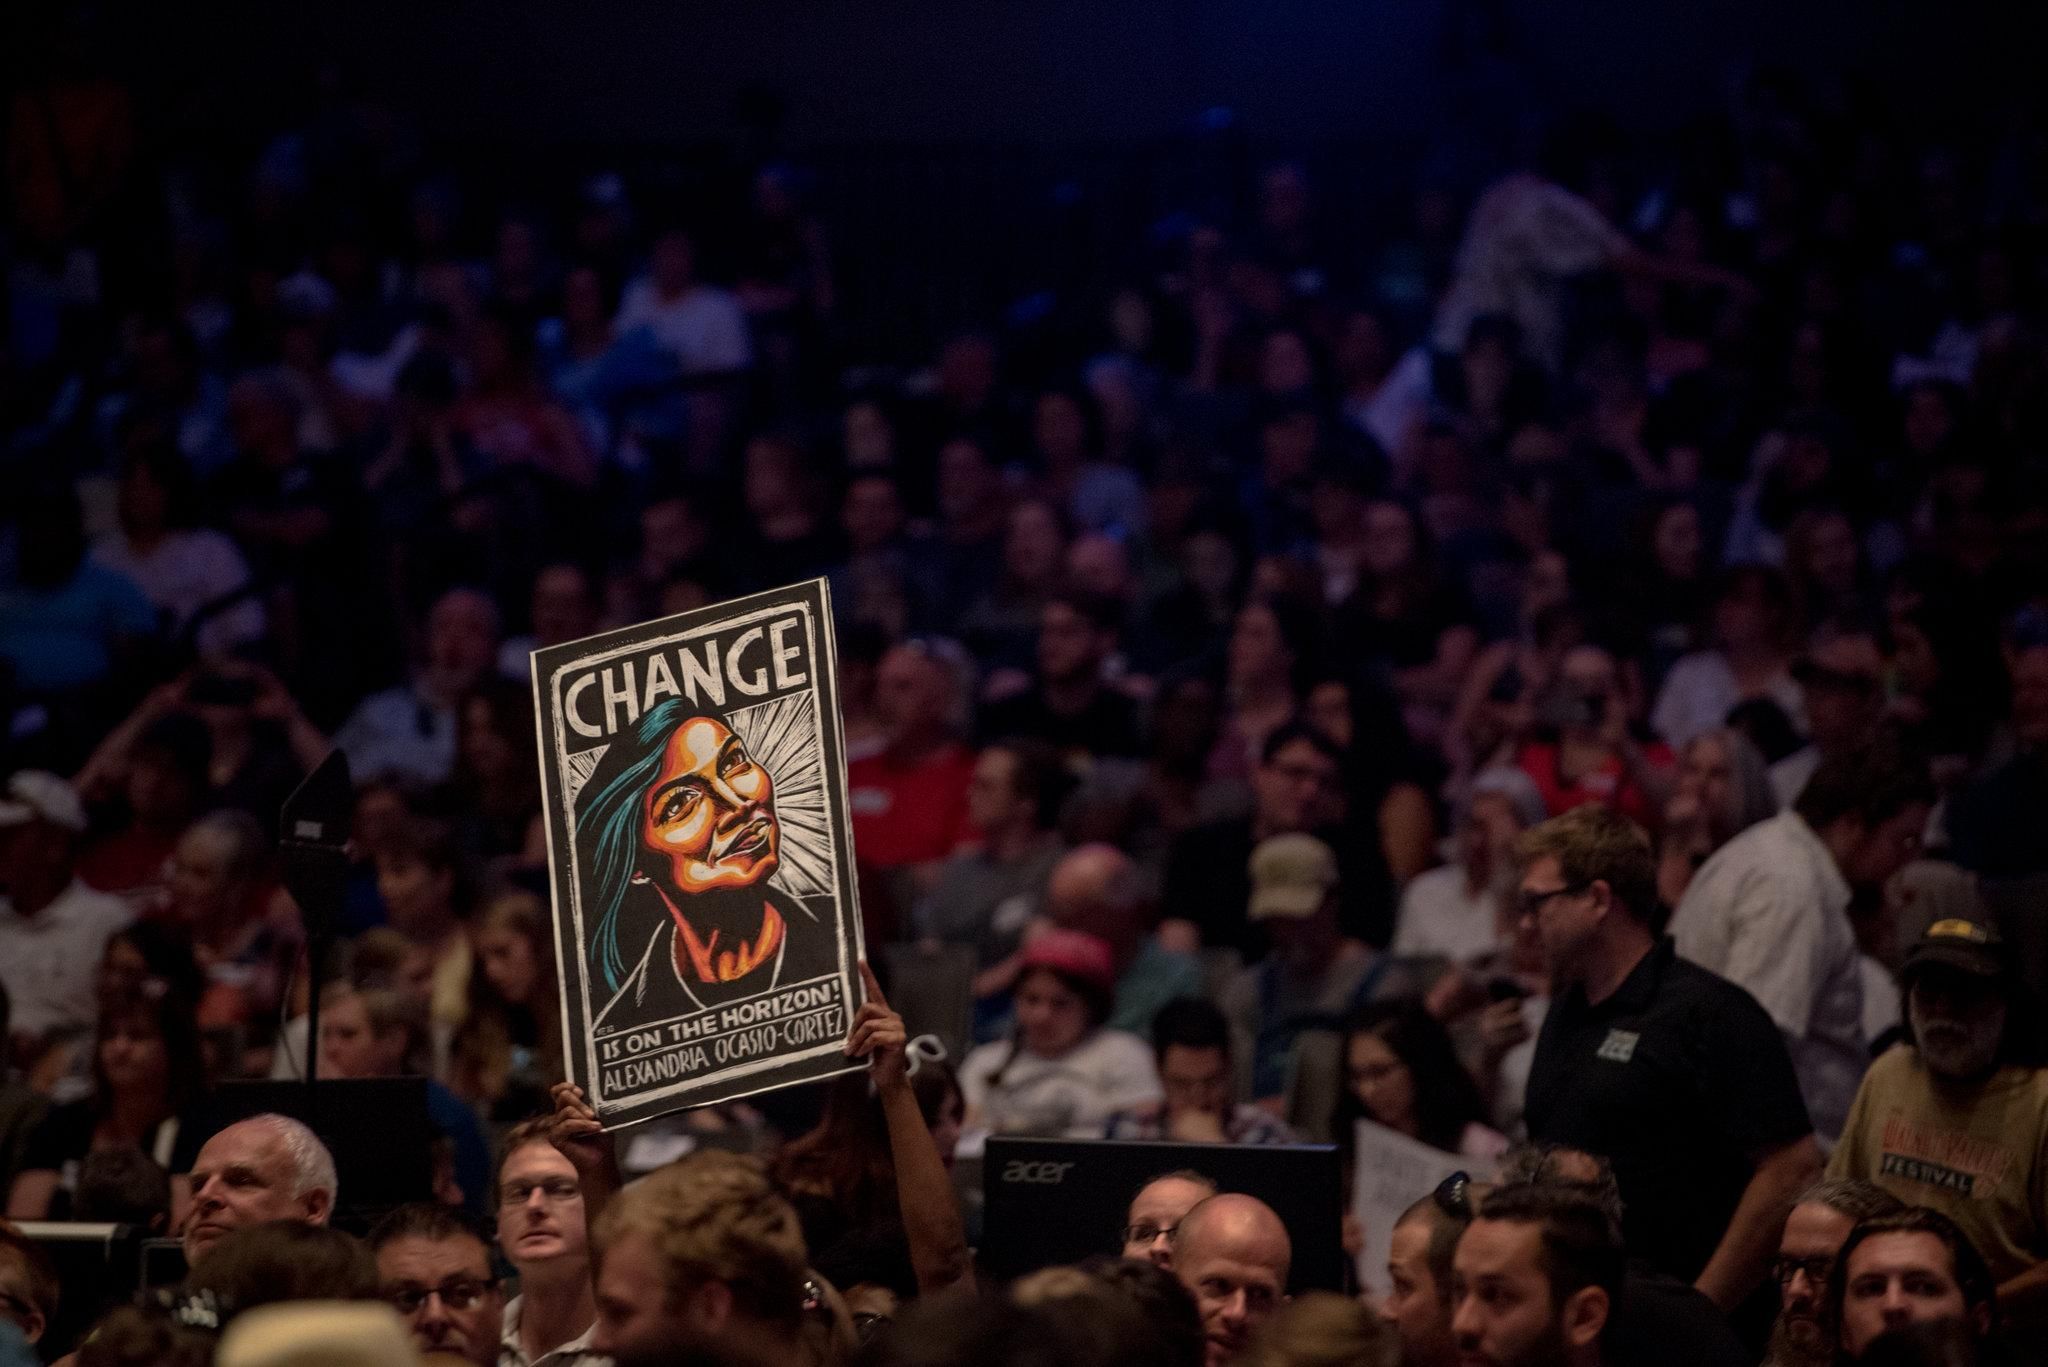 At a rally last week in Wichita, Kan., for James Thompson, a Democratic House candidate for a House seat, an audience member displayed a sign portraying Alexandria Ocasio-Cortez, a member of the Democratic Socialists of America and Democratic nominee for a House seat in New York City. (Photo: Hilary Swift for The New York Times) 